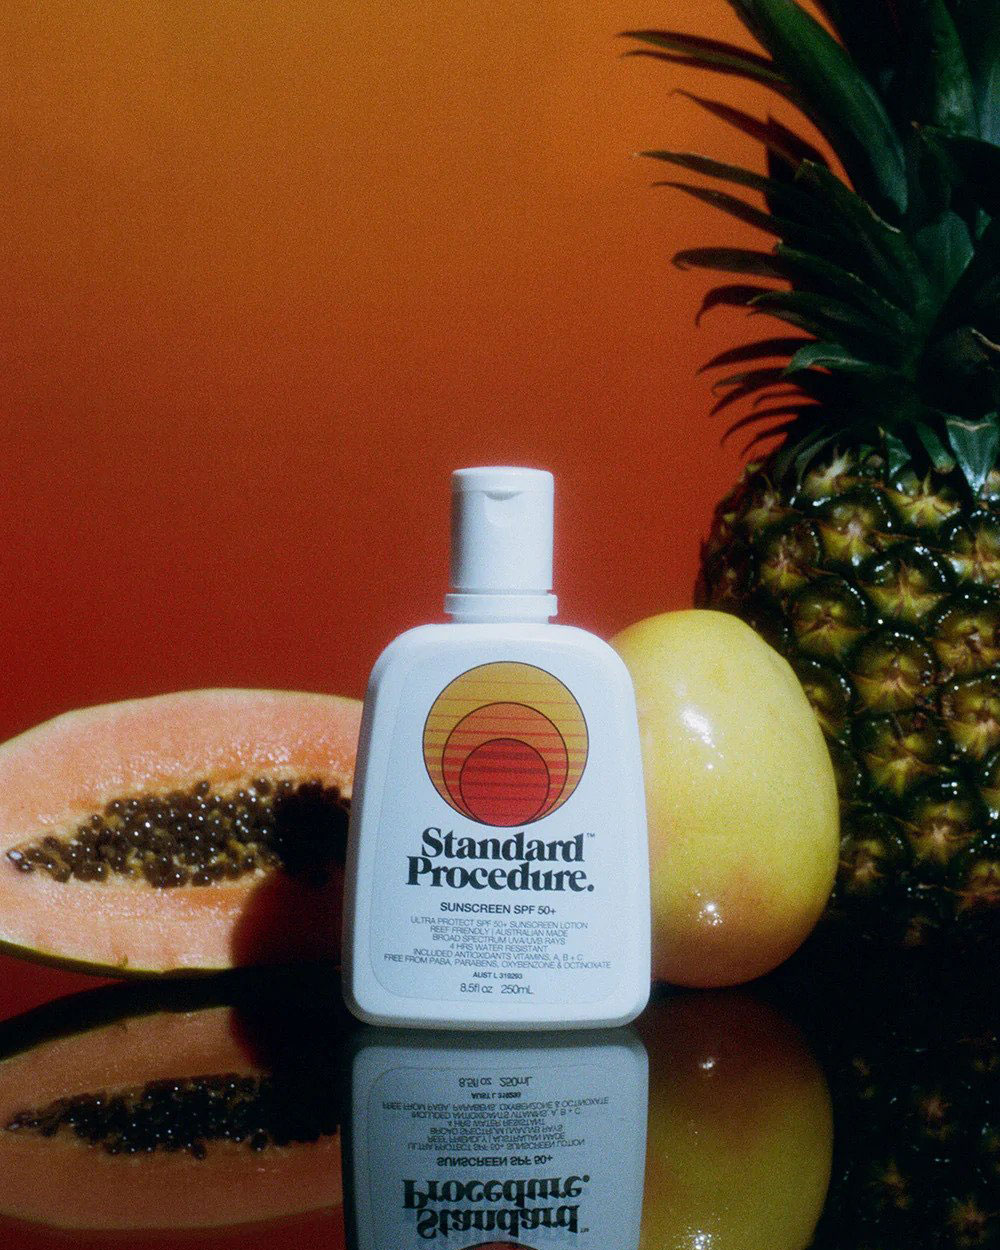 A white bottle of Standard Procedure sunscreen in front of a papaya, mango and pineapple, against an orange backdrop. 